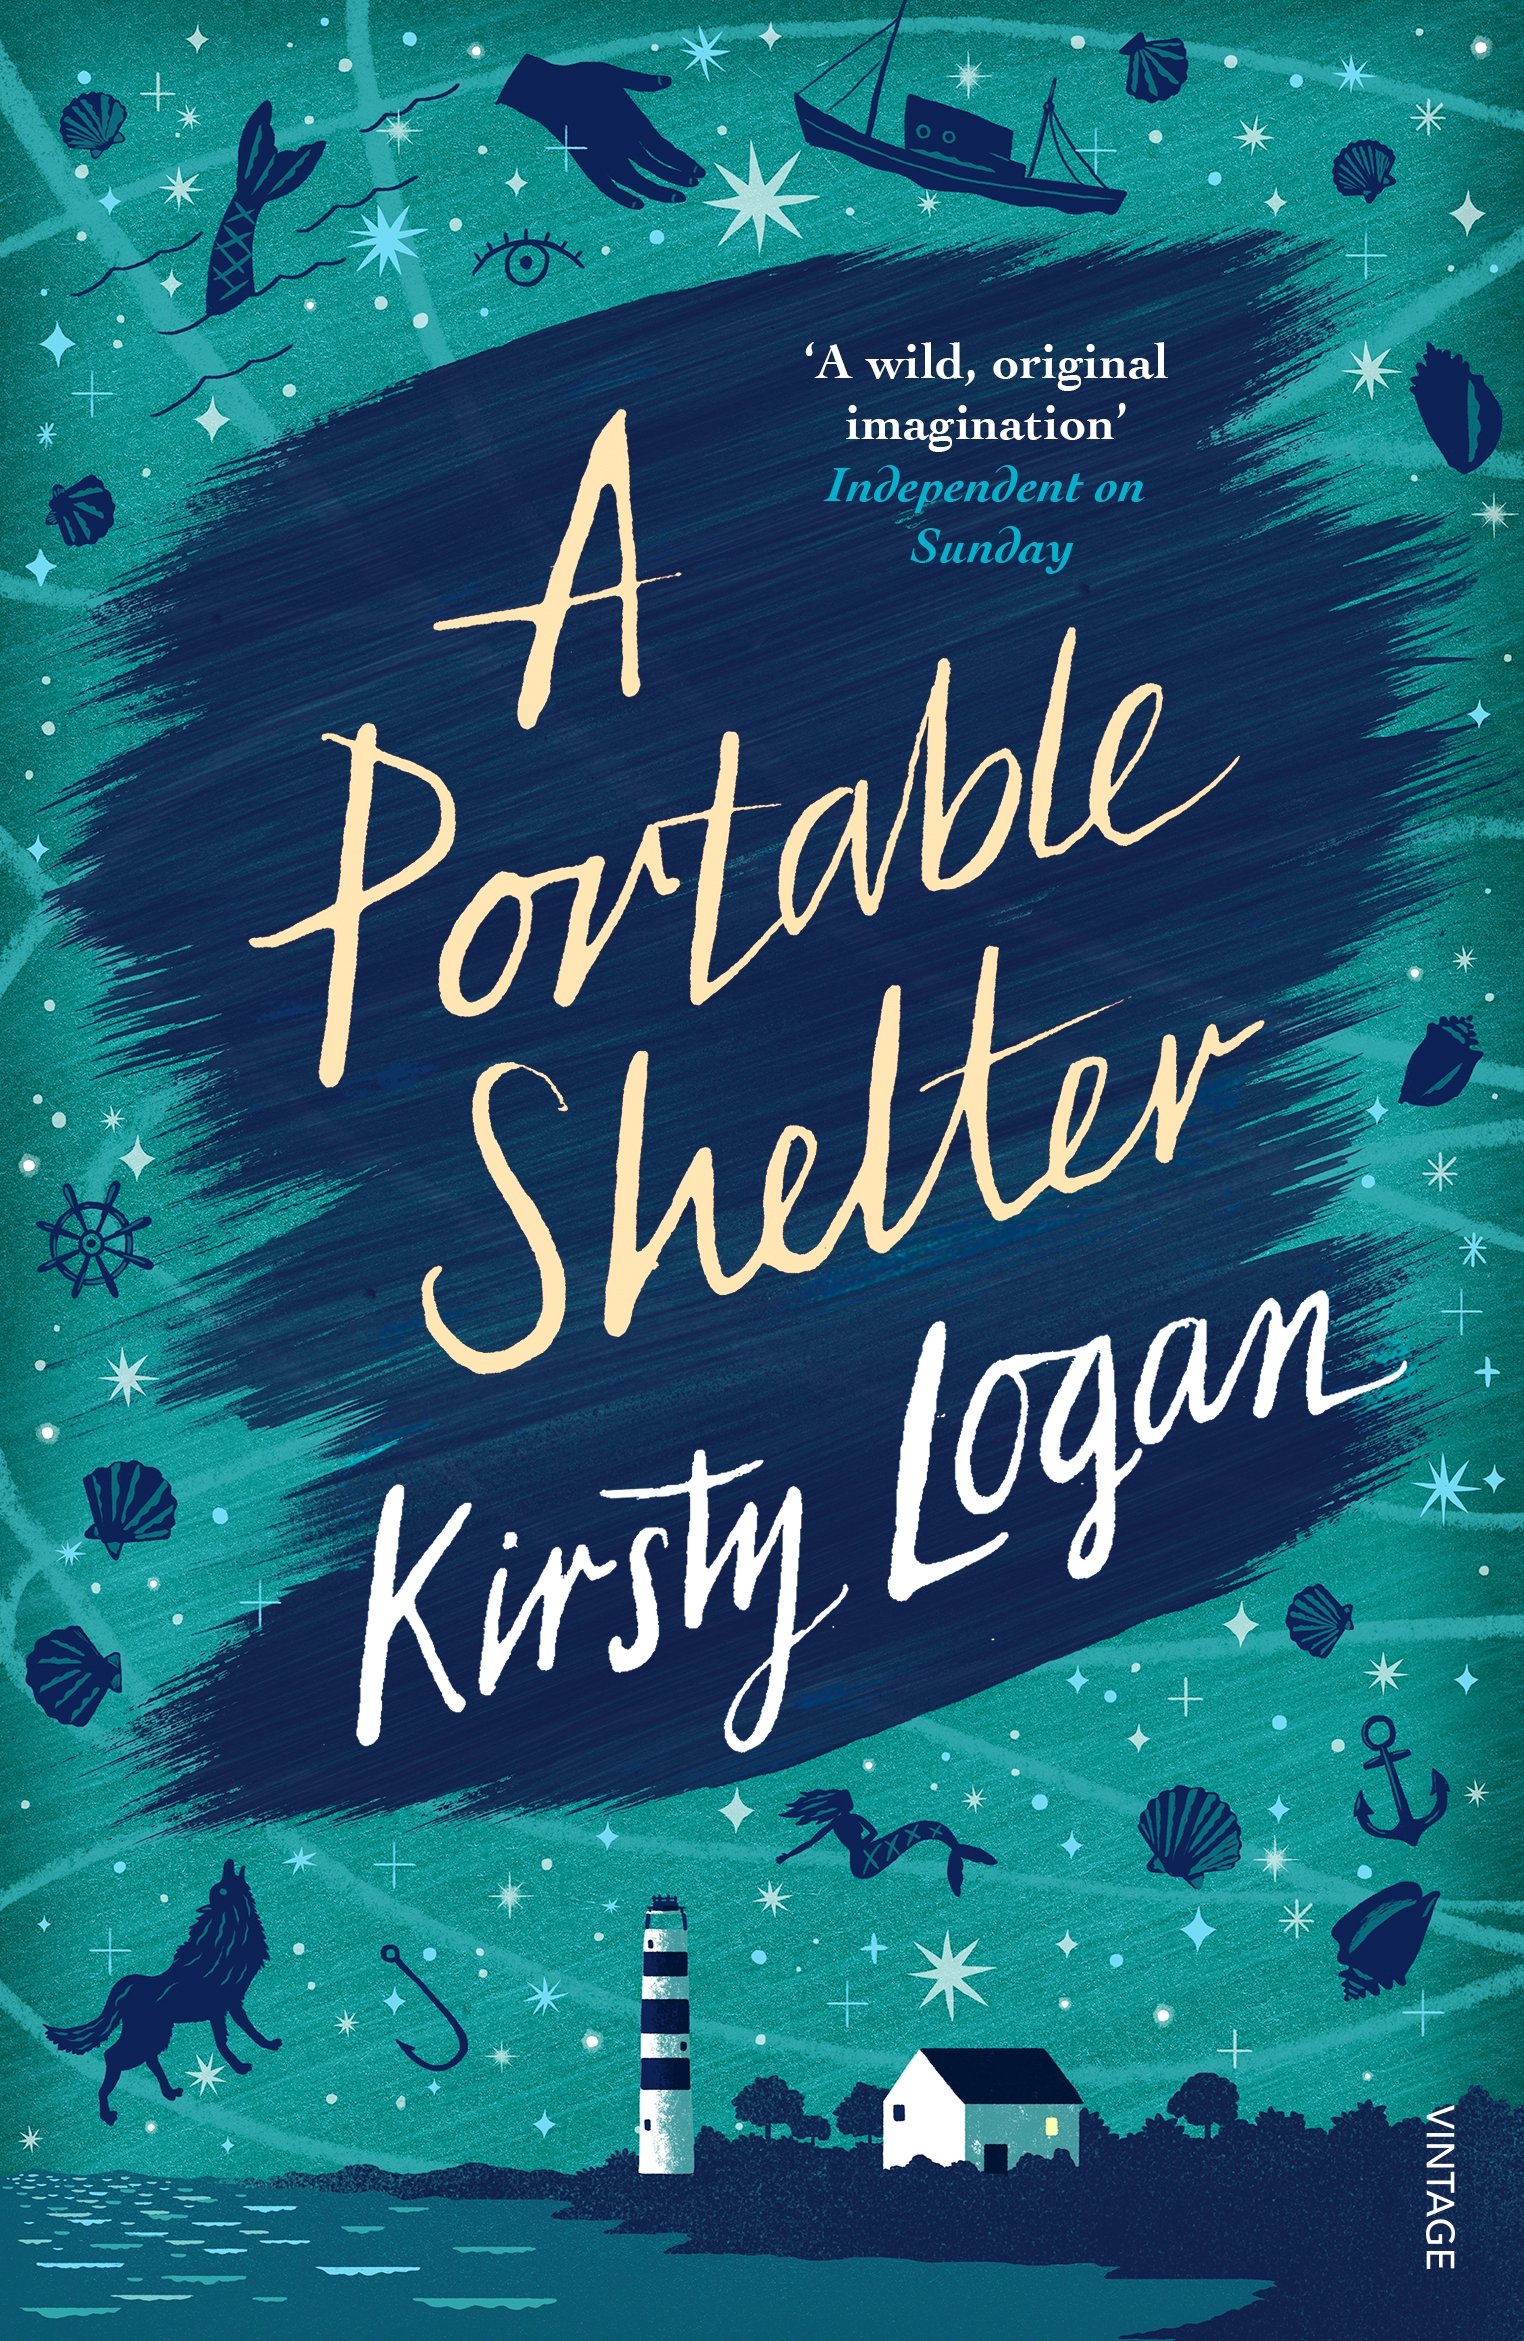 A Portable Shelter | Kirsty Logan